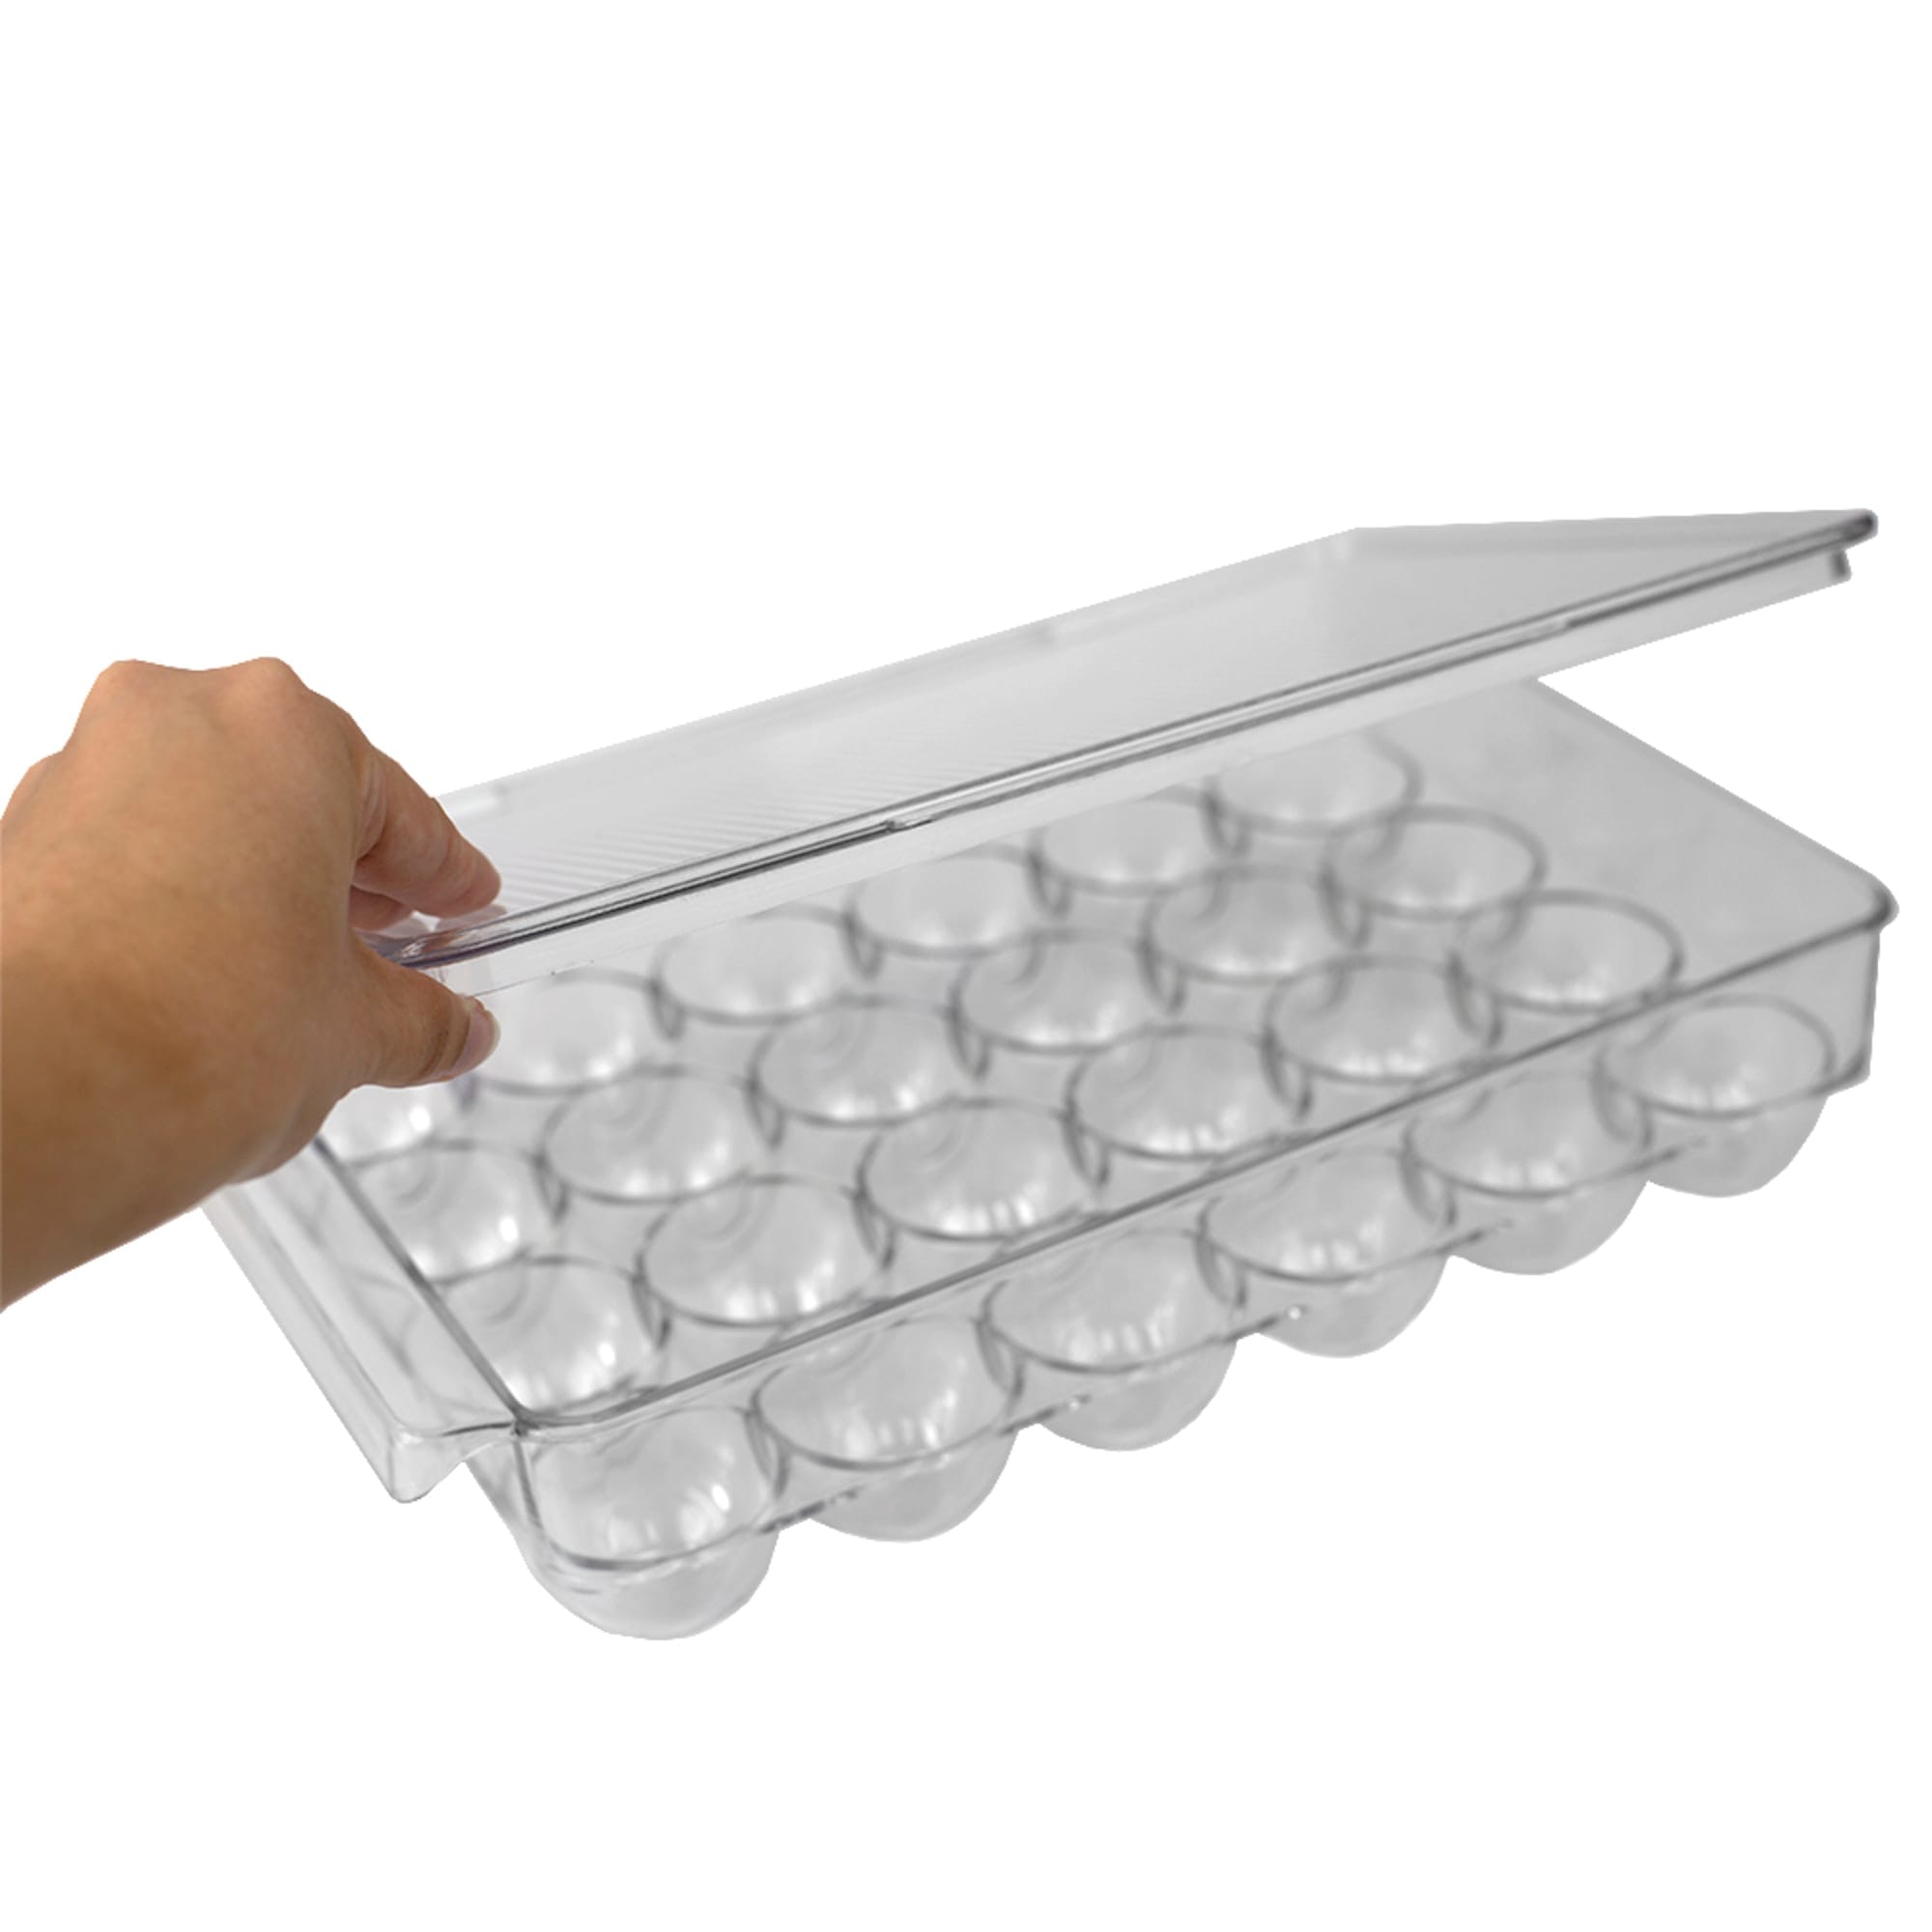 Michael Graves Design Stackable 24 Compartment Plastic Egg Container with Lid, Clear $8.00 EACH, CASE PACK OF 12